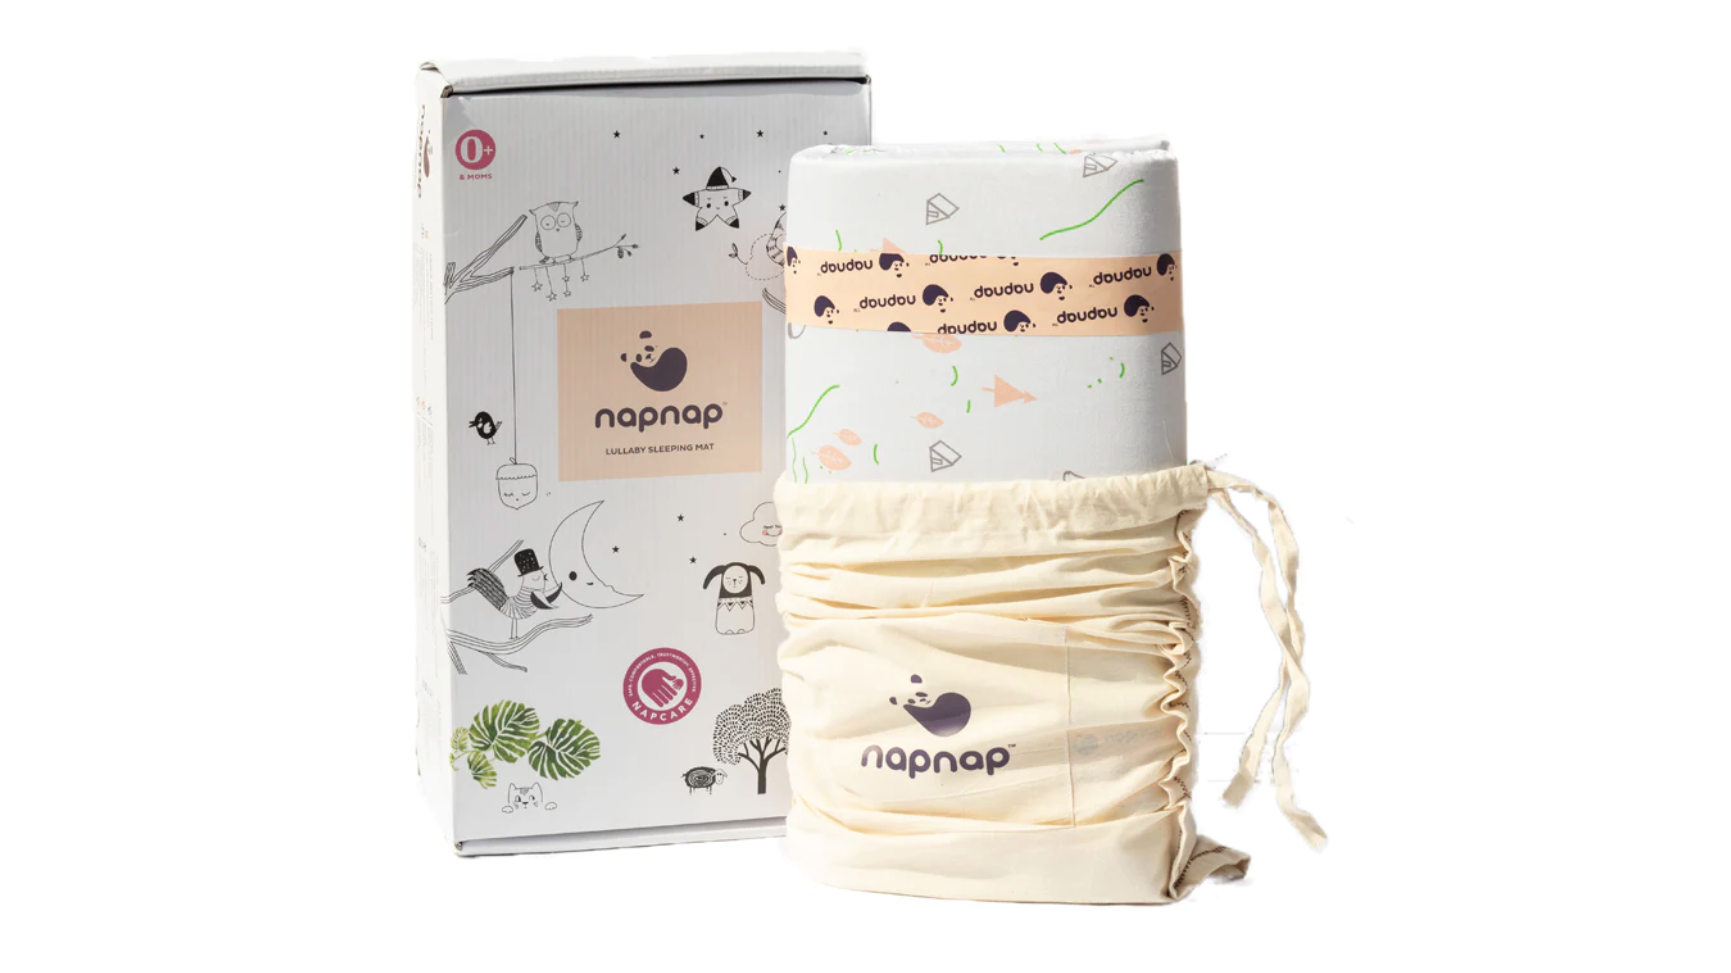 Get The Best Portable Baby Mat Gifts With Smart Sleep Technology For Mums-To-Be